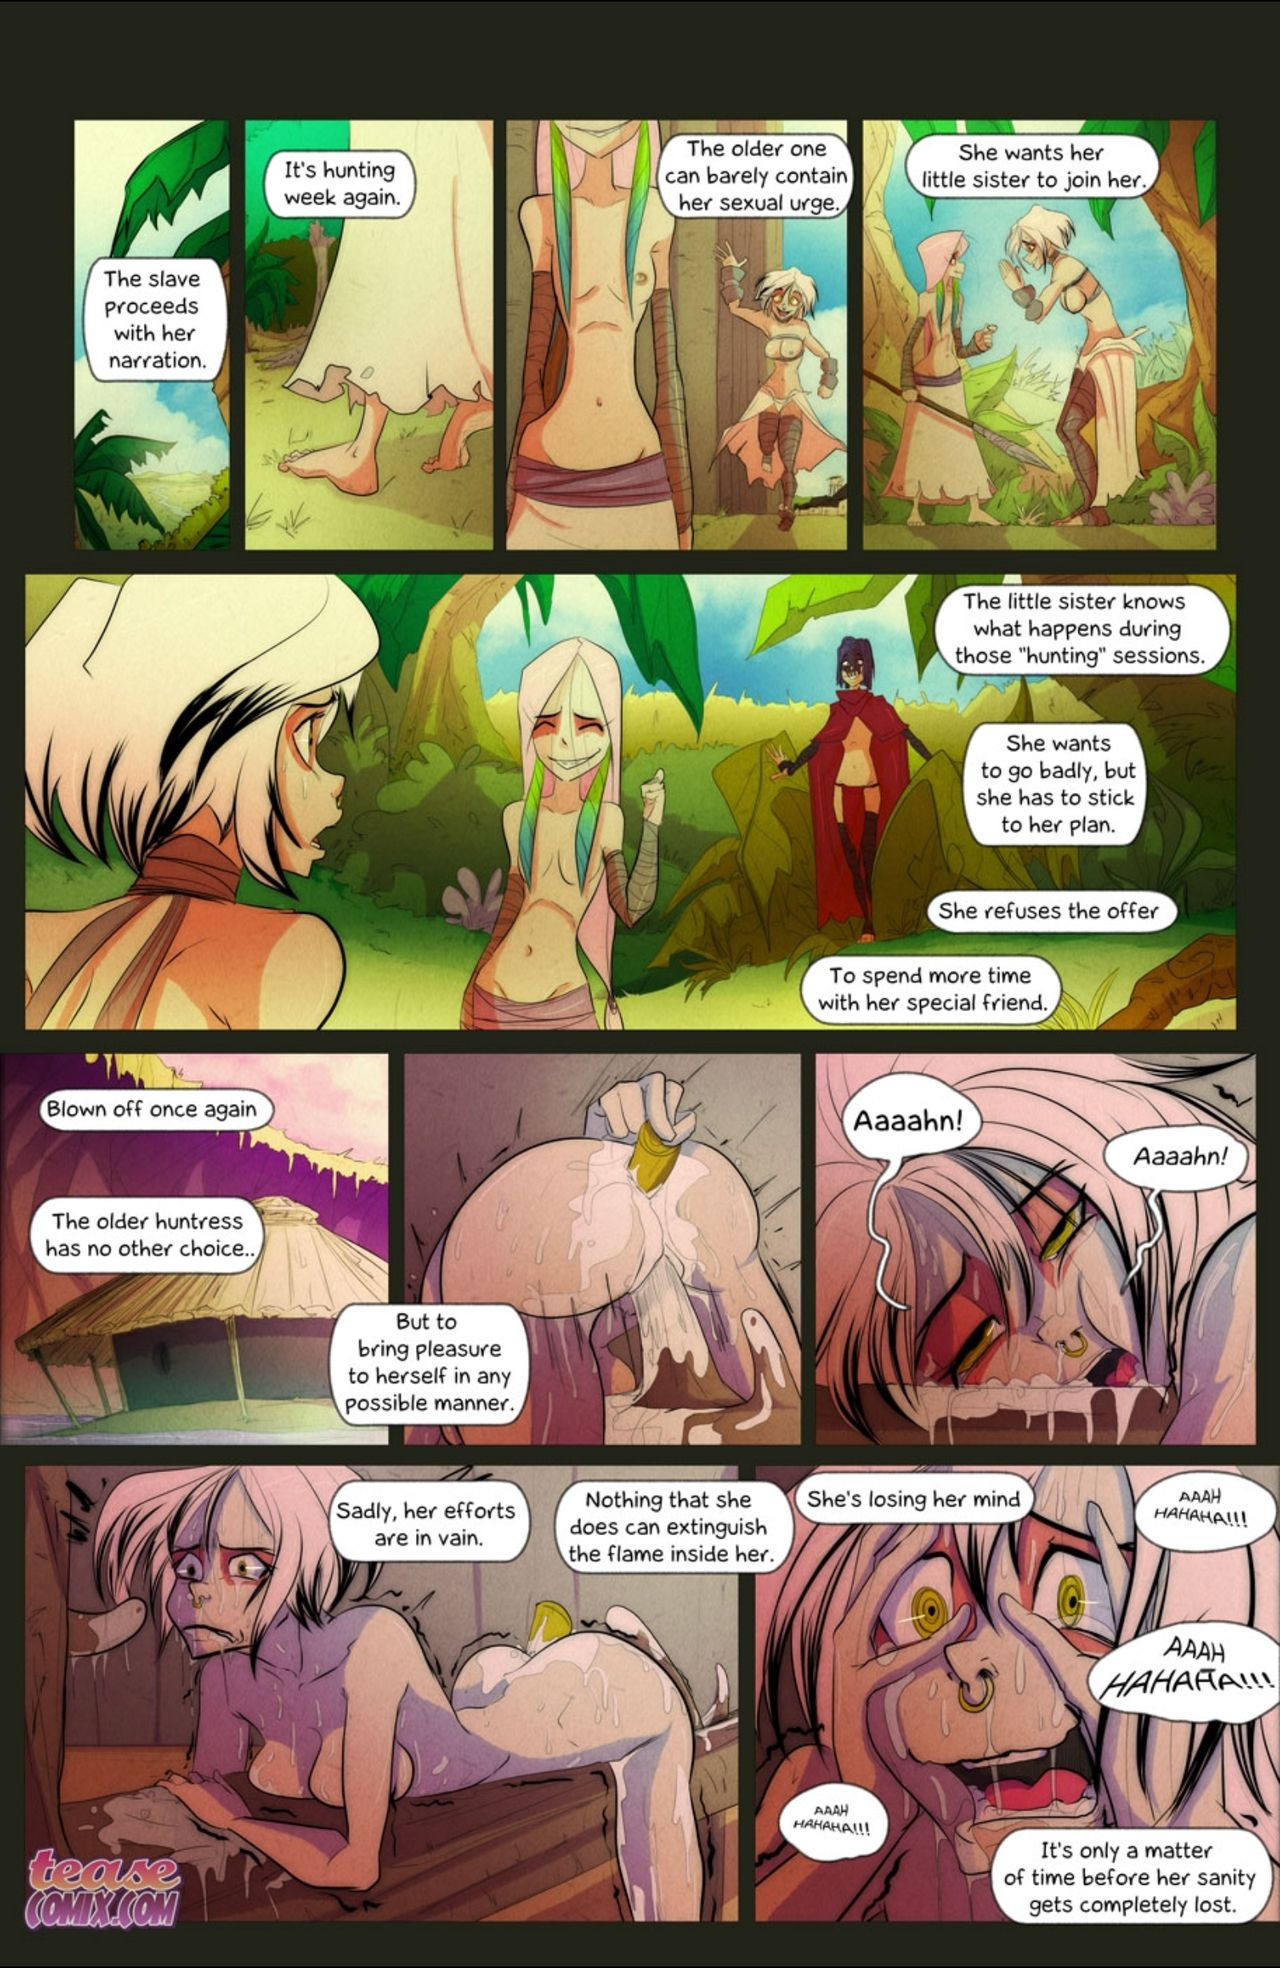 The Snake and The Girl 4 porn comics Oral sex, BDSM, Bestiality, Lesbians, Rape, Sex Toys, Stockings